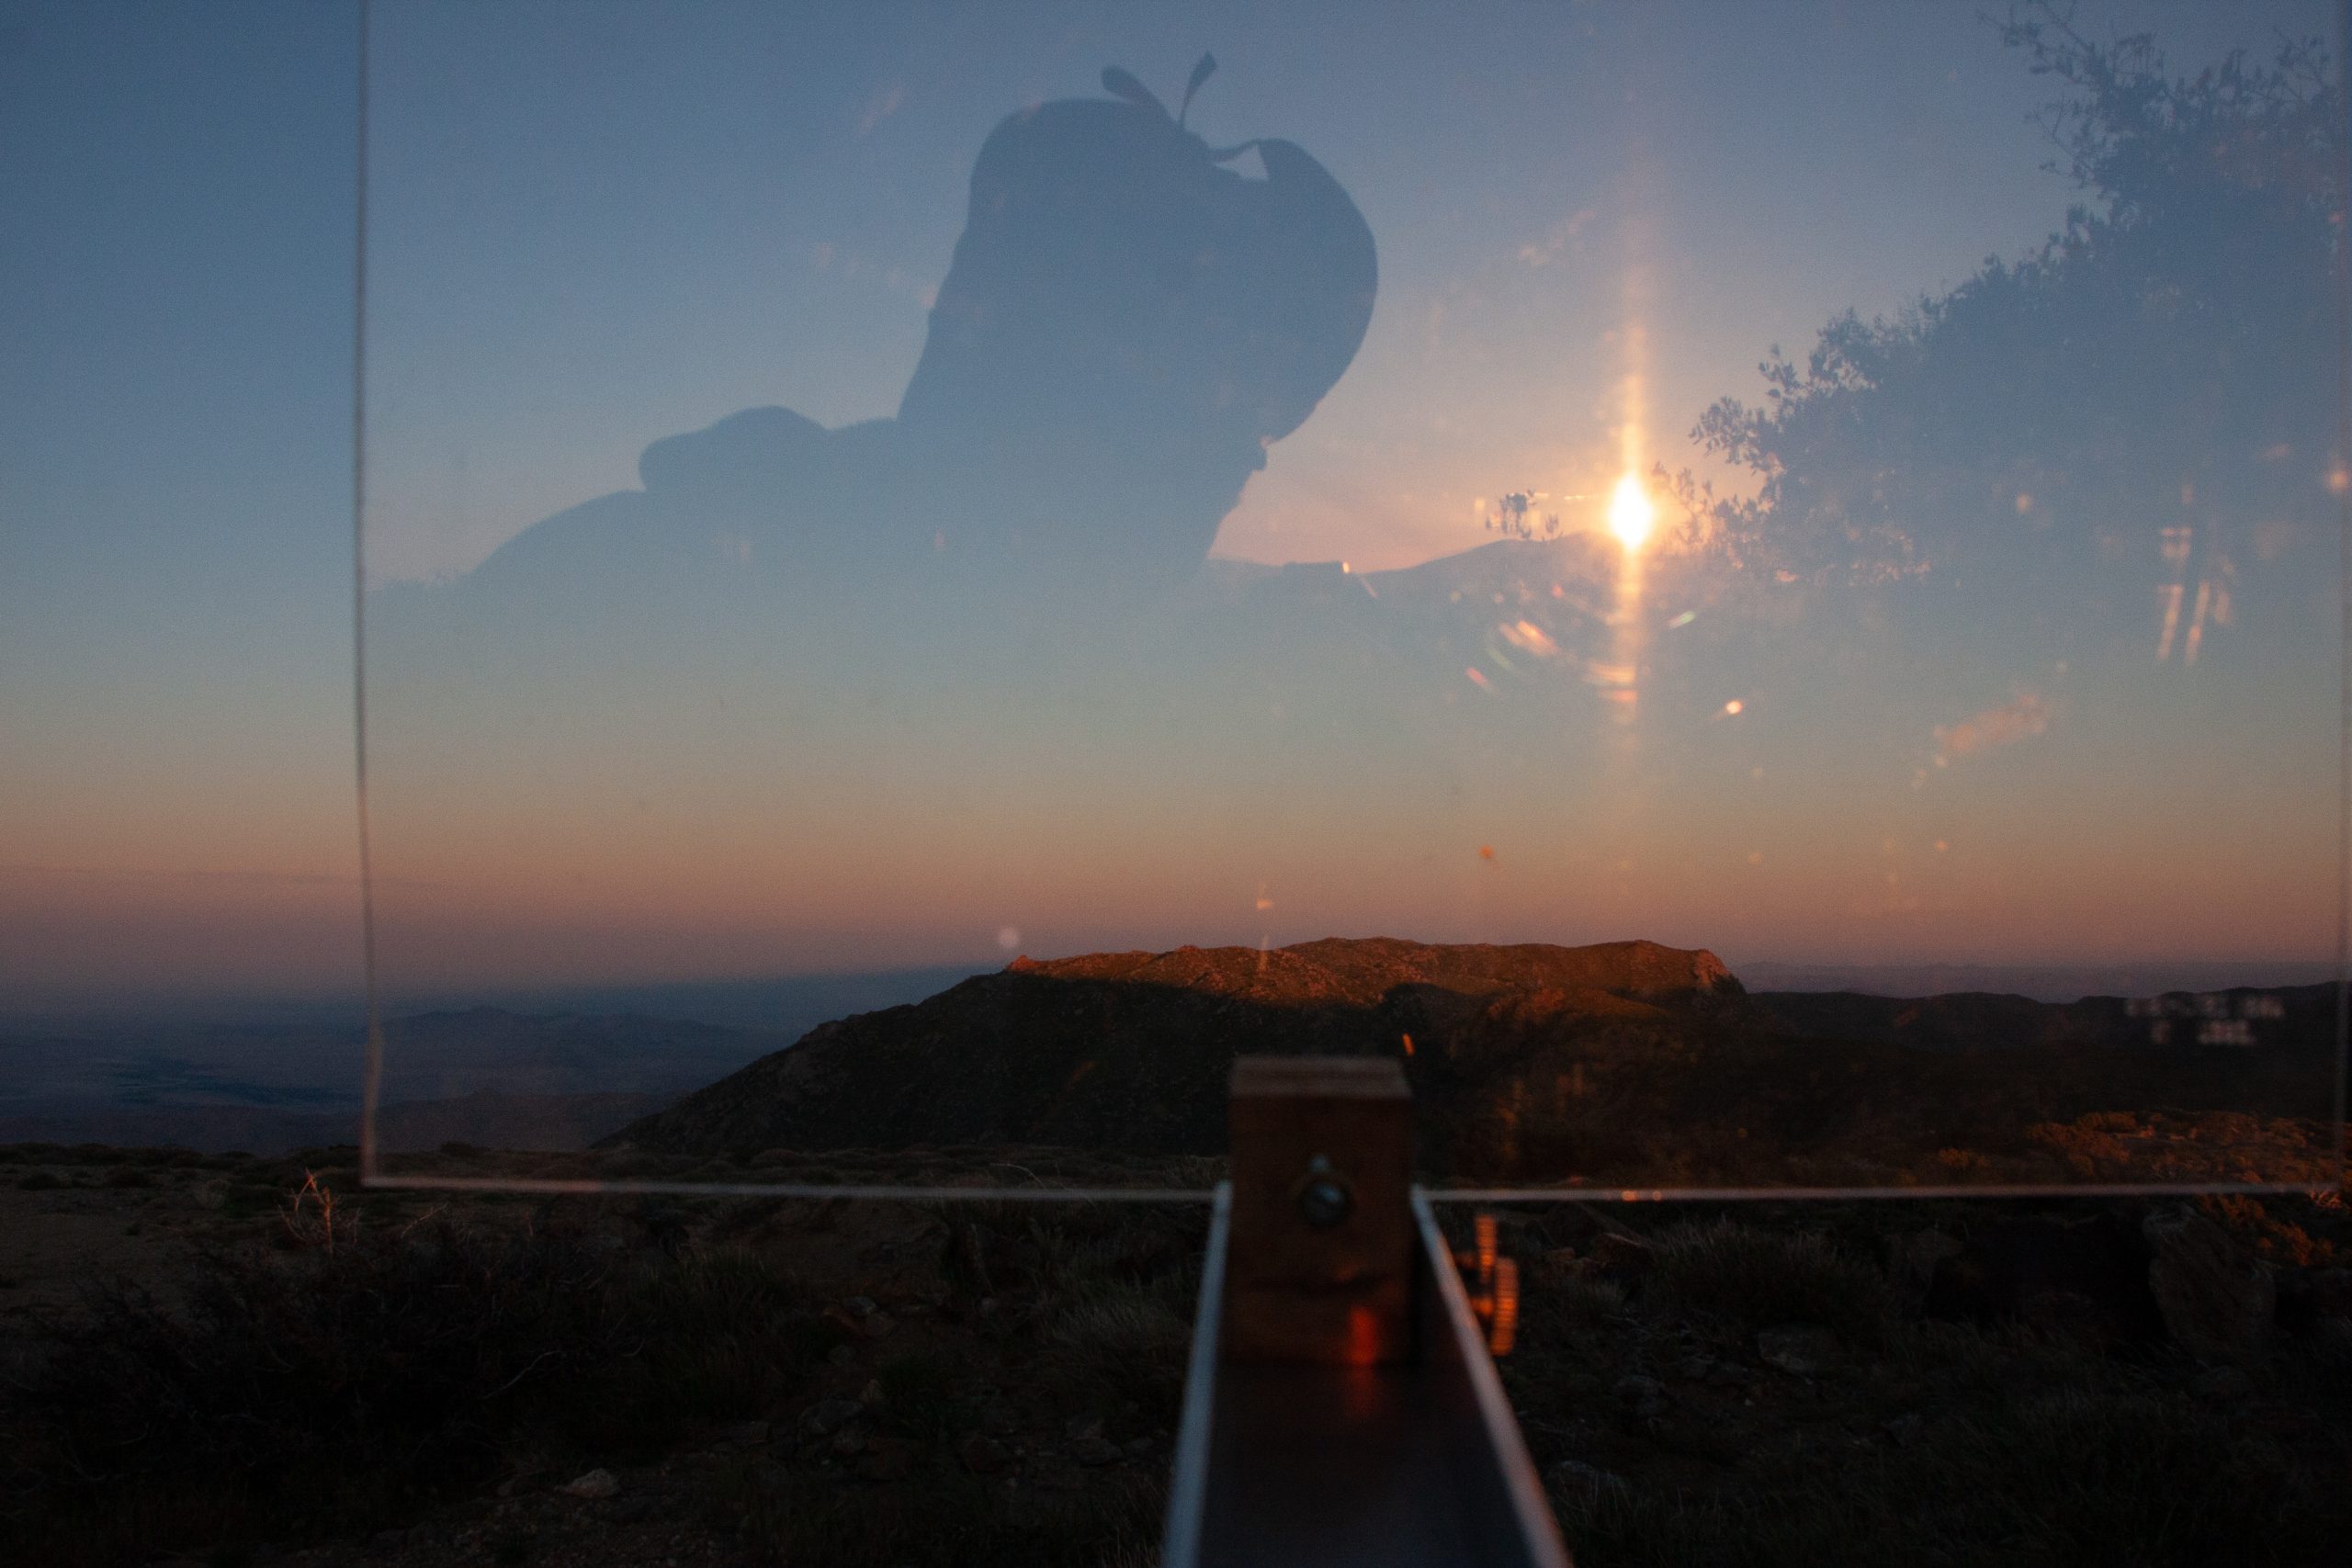 Behind a transparent plastic pane, the Moon can be seen just above a rocky horizon, where a rocky outcrop catches the low sunlight and appears reddish. The Sun is seen reflected in the pane, above and to the right of the Moon. The photographer's silhouette is also seen in the plastic.